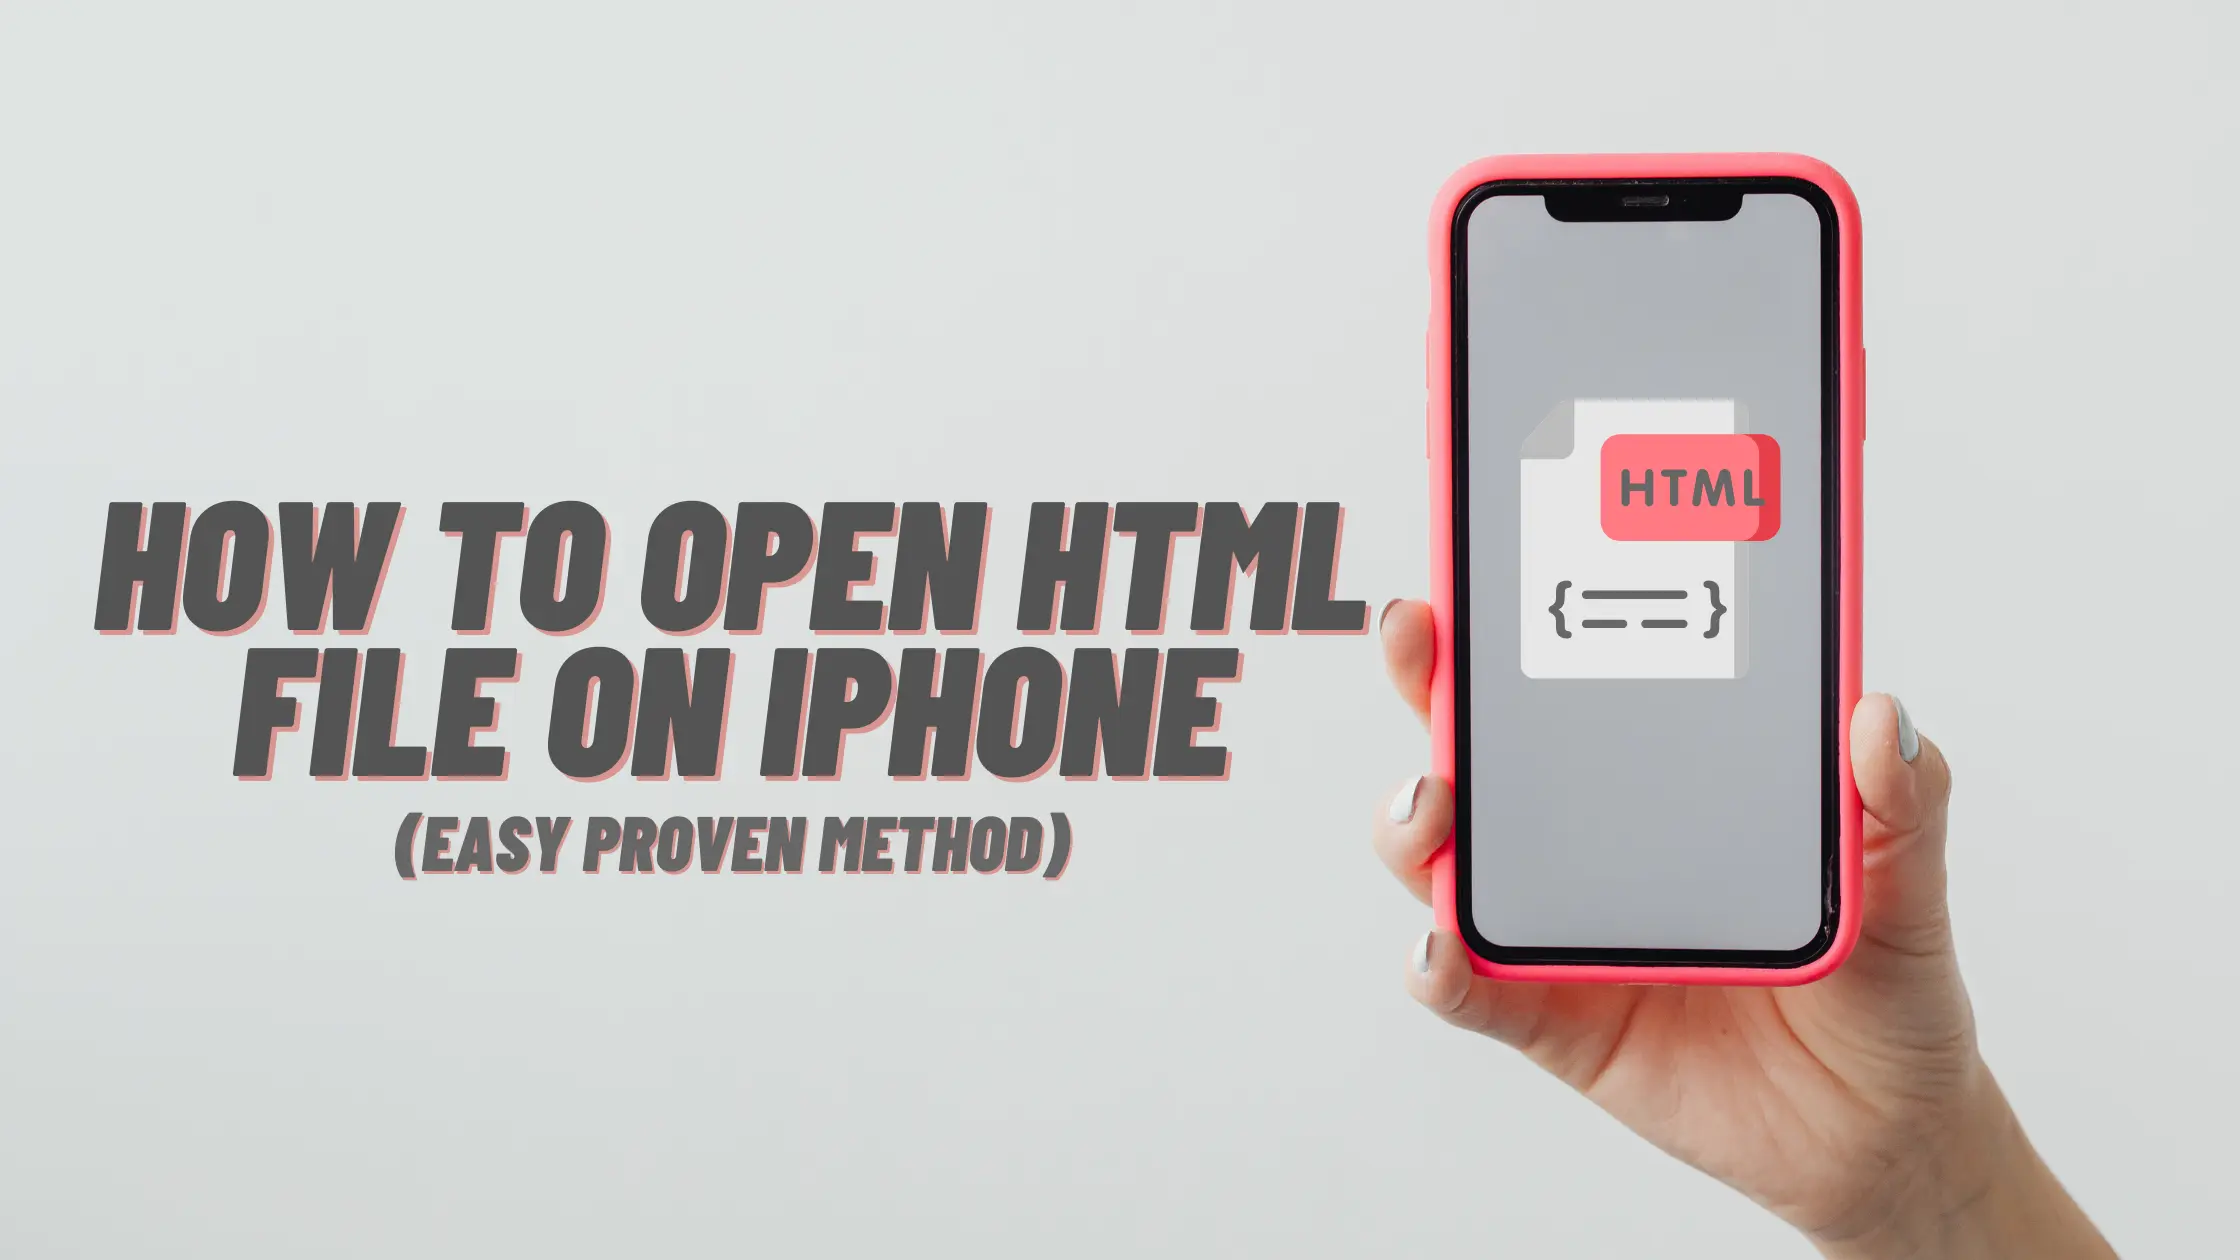 open html file on iphone